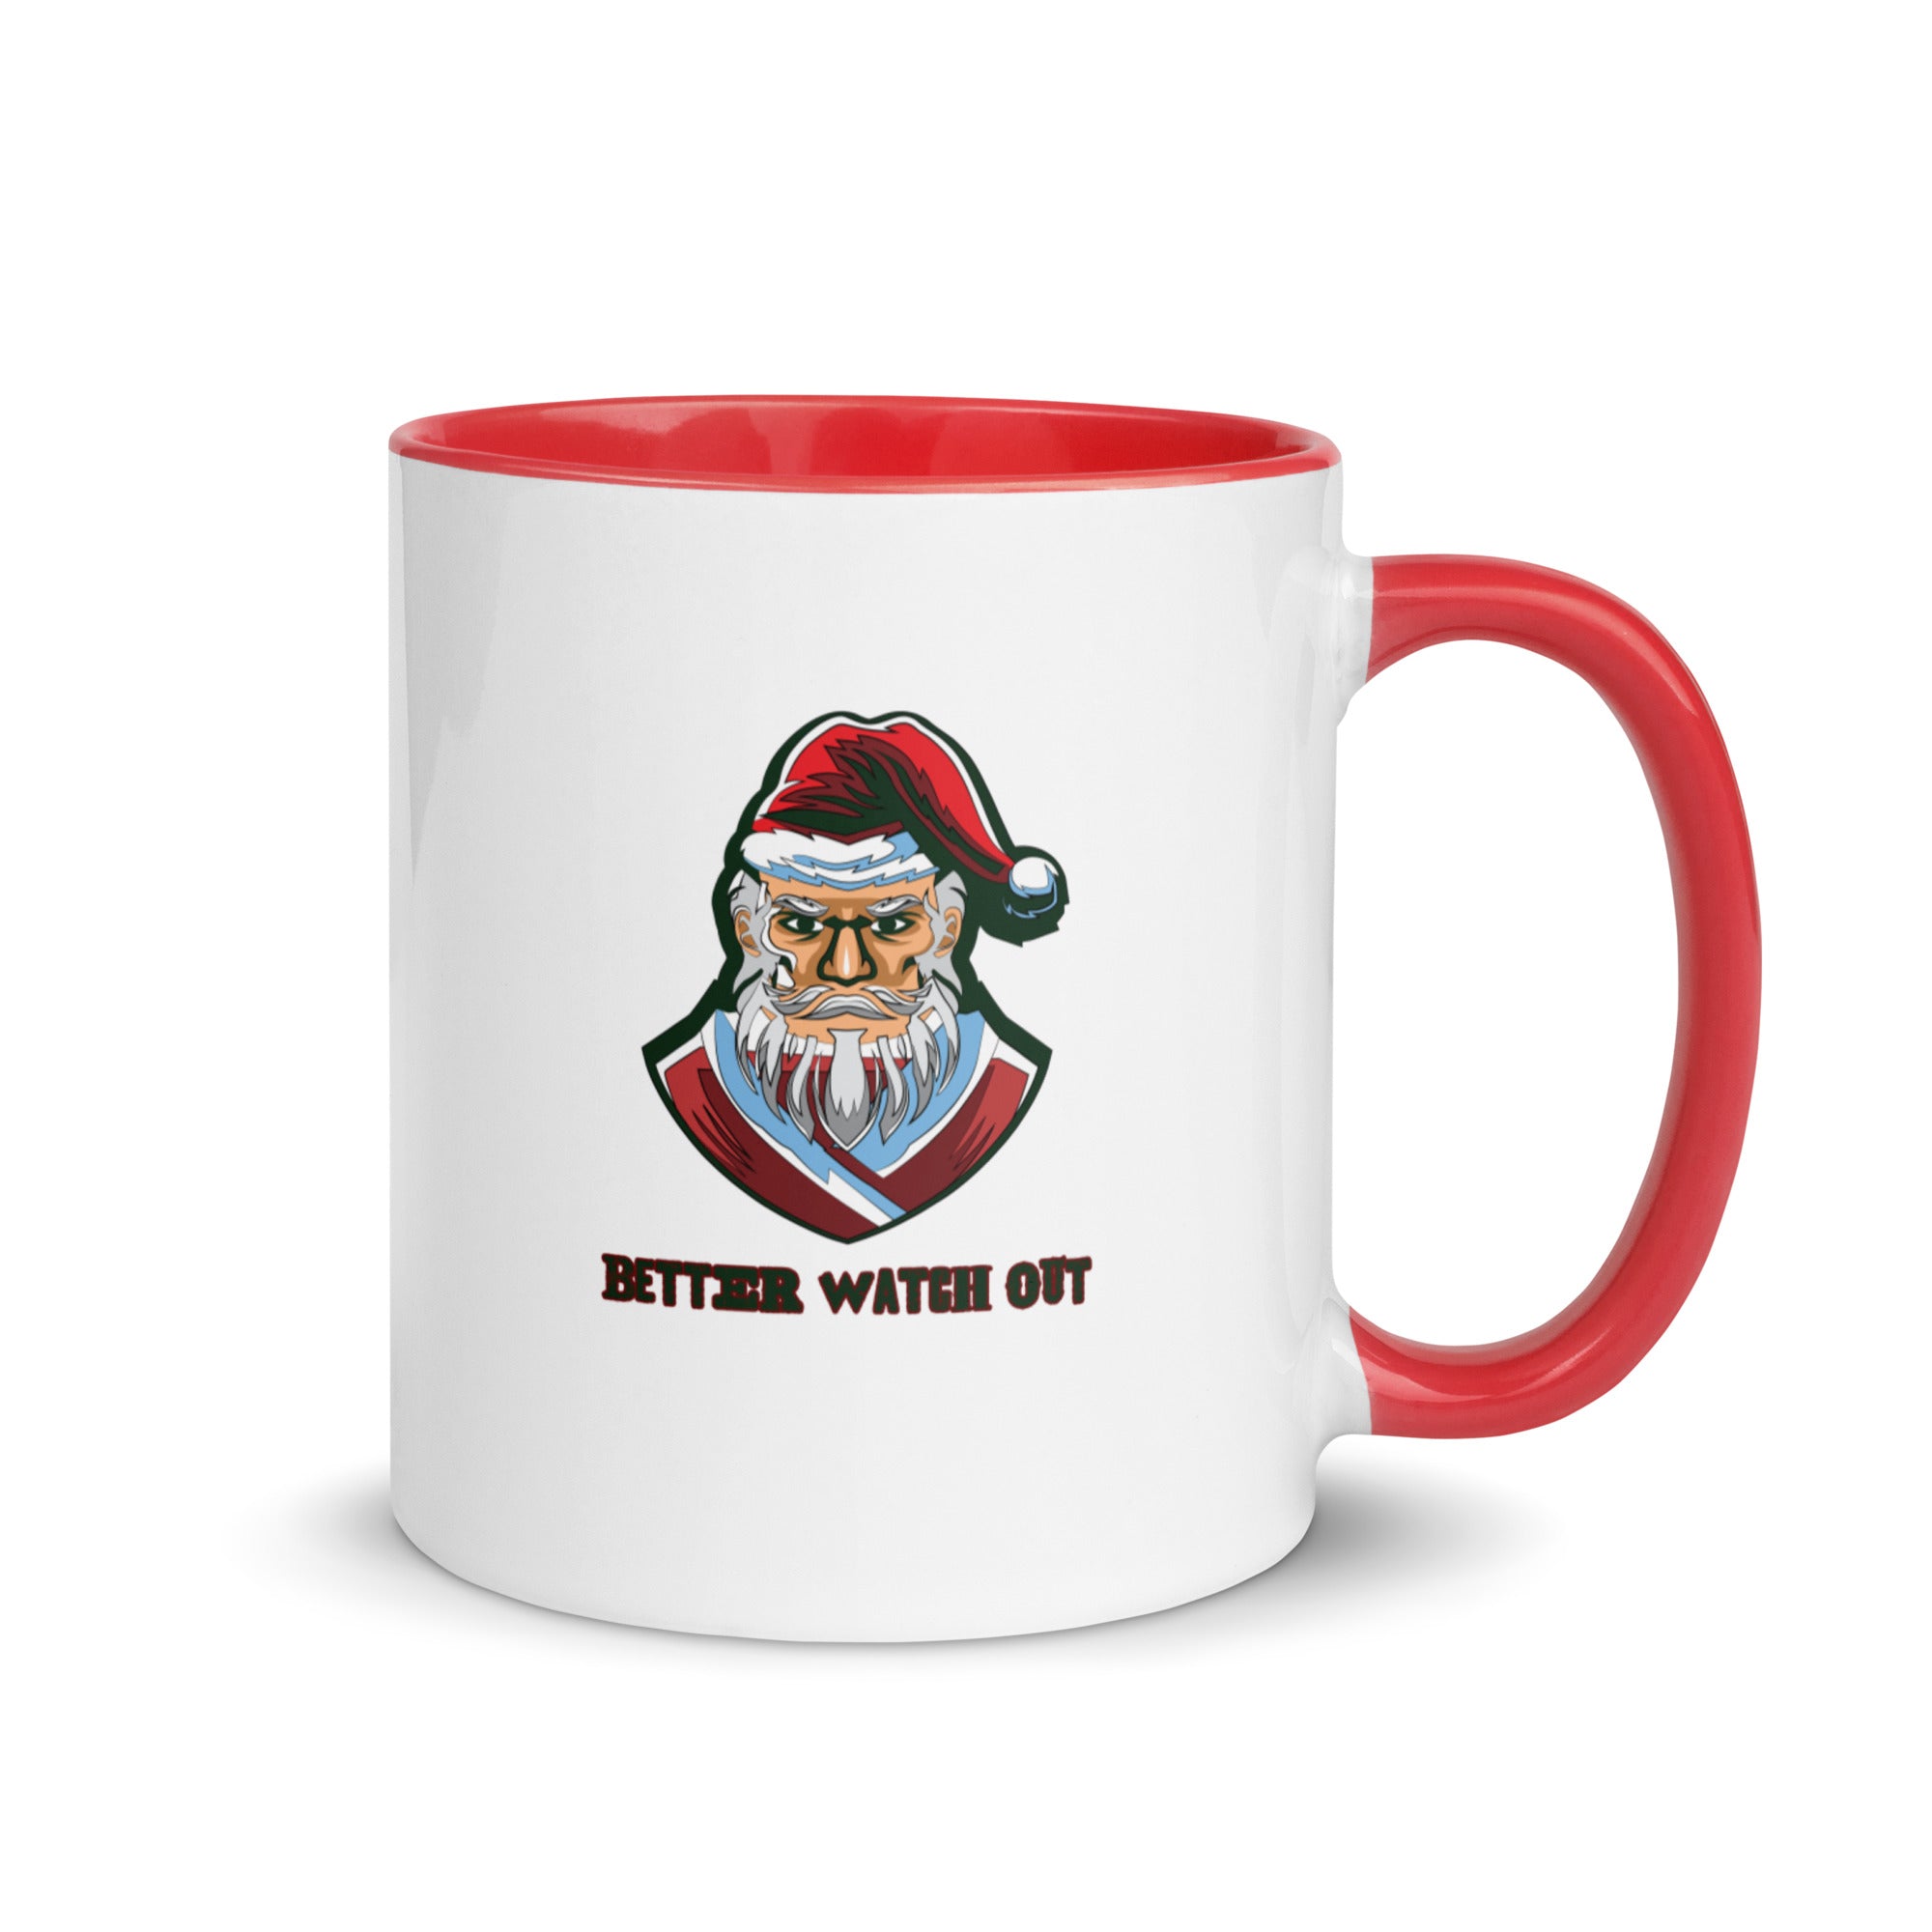 Better Watch Out Mug with Color Inside